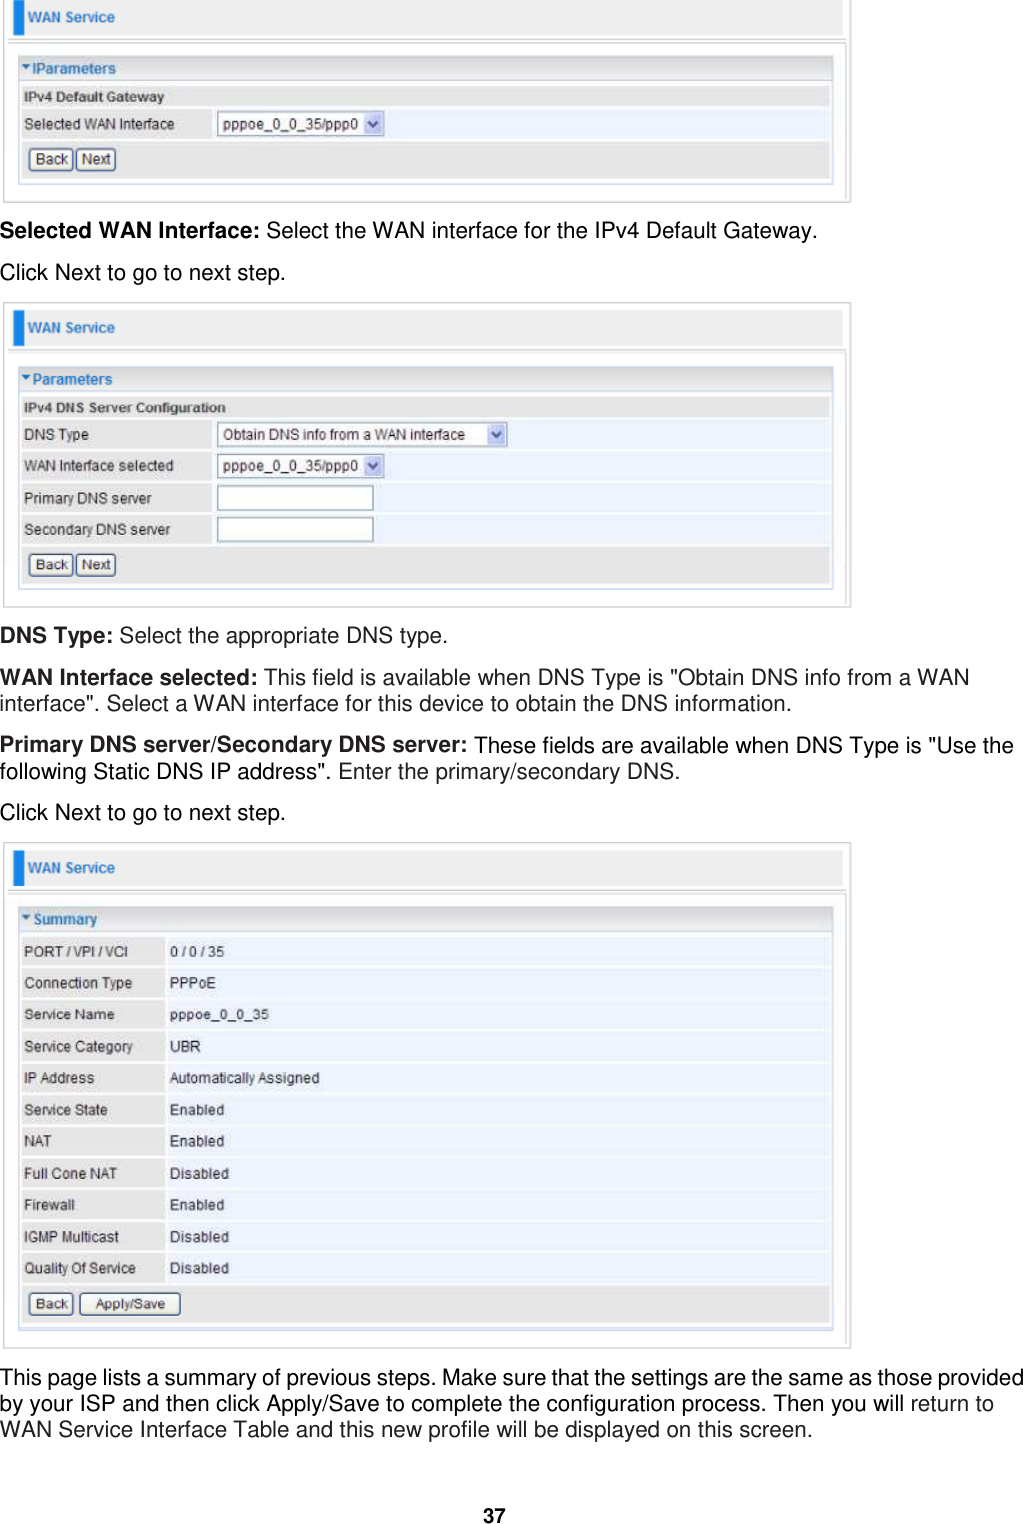  37  Selected WAN Interface: Select the WAN interface for the IPv4 Default Gateway. Click Next to go to next step.  DNS Type: Select the appropriate DNS type.  WAN Interface selected: This field is available when DNS Type is &quot;Obtain DNS info from a WAN interface&quot;. Select a WAN interface for this device to obtain the DNS information. Primary DNS server/Secondary DNS server: These fields are available when DNS Type is &quot;Use the following Static DNS IP address&quot;. Enter the primary/secondary DNS. Click Next to go to next step.  This page lists a summary of previous steps. Make sure that the settings are the same as those provided by your ISP and then click Apply/Save to complete the configuration process. Then you will return to WAN Service Interface Table and this new profile will be displayed on this screen. 